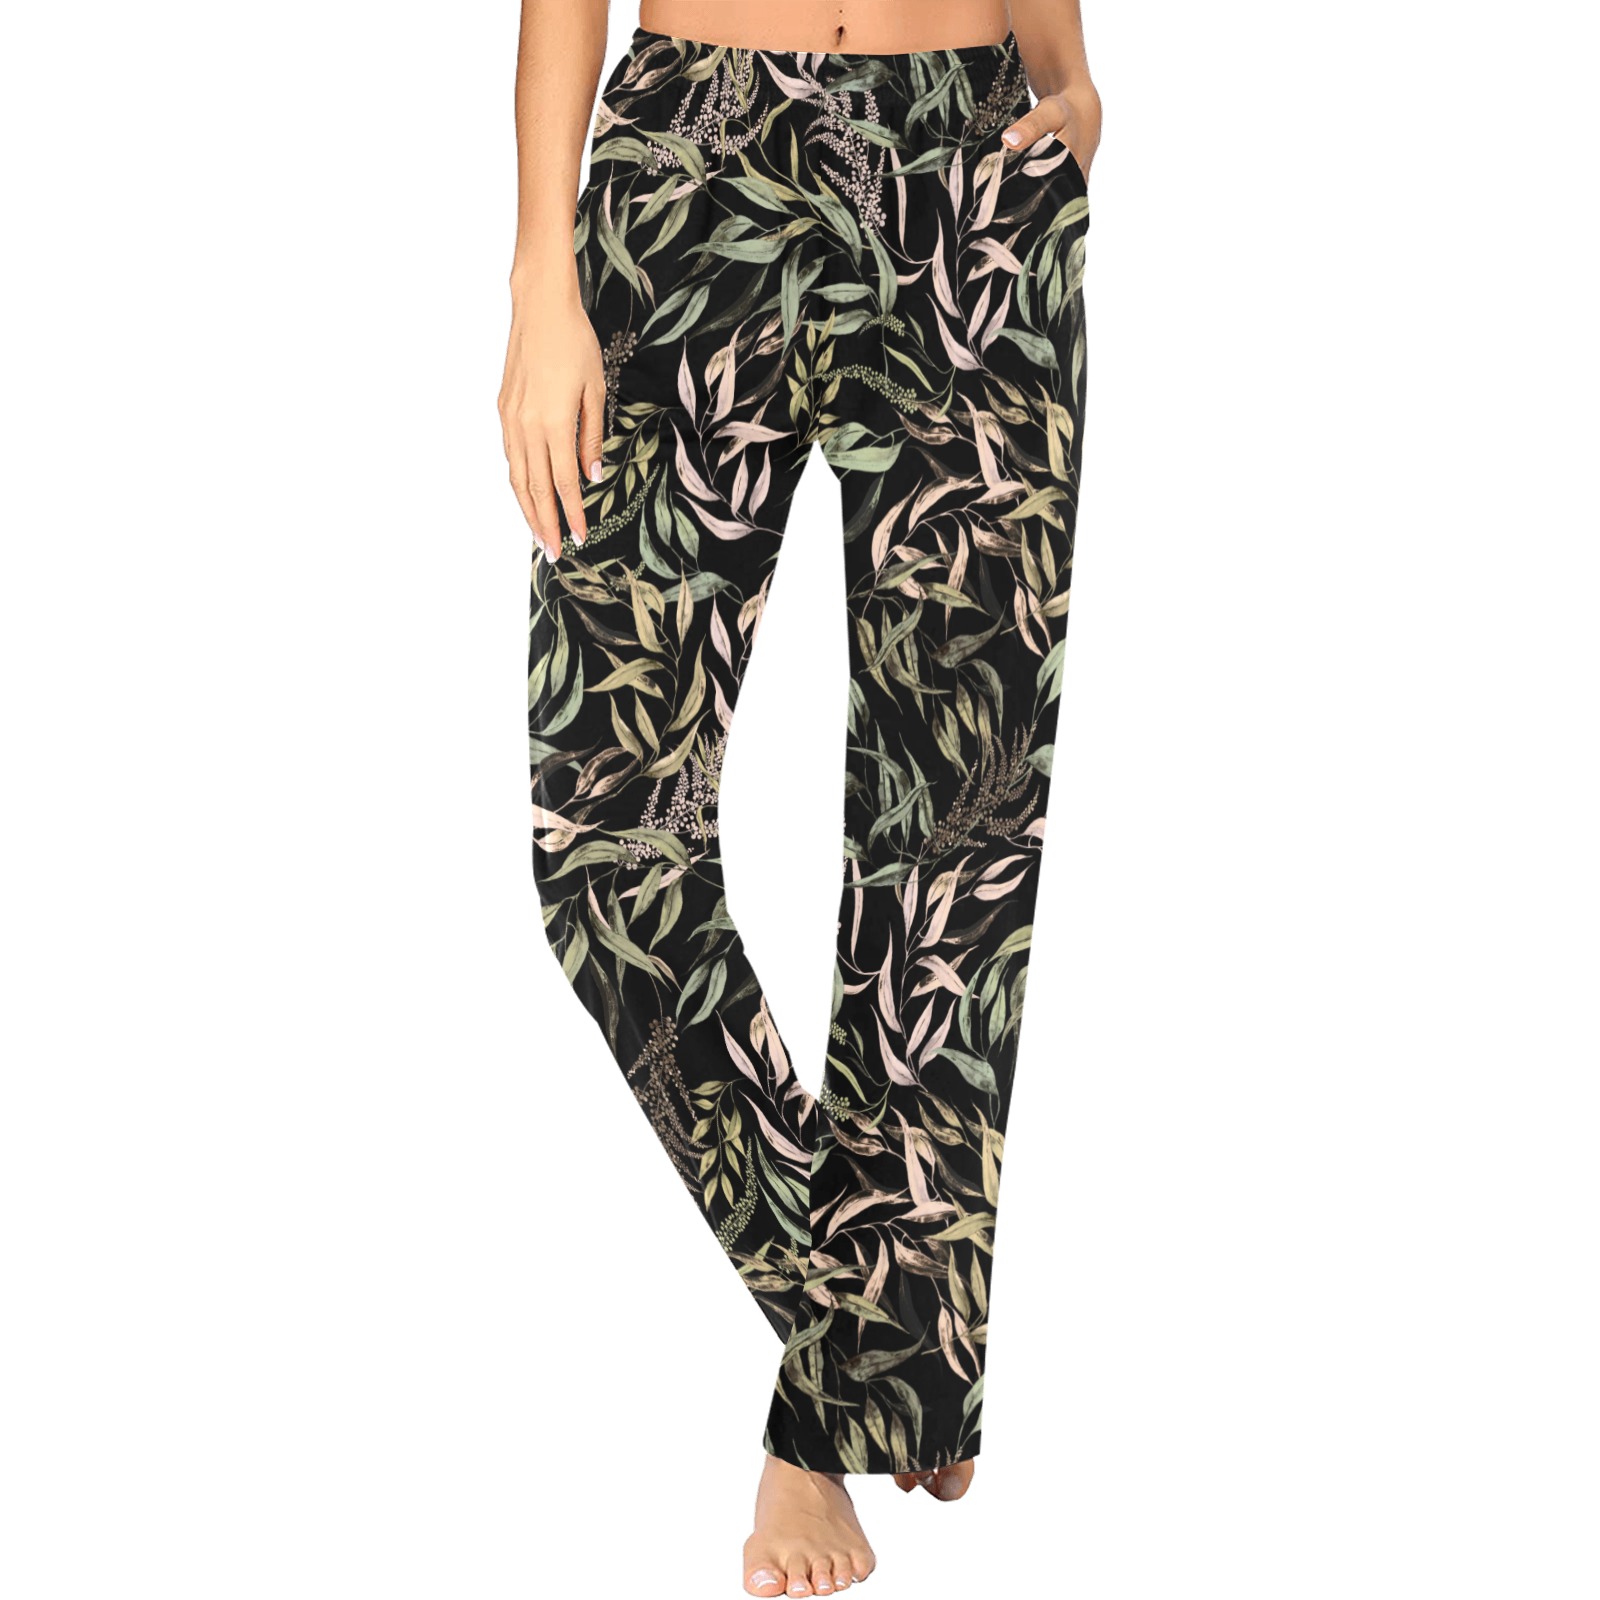 Dark Forest leaves dramatic Women's Pajama Trousers